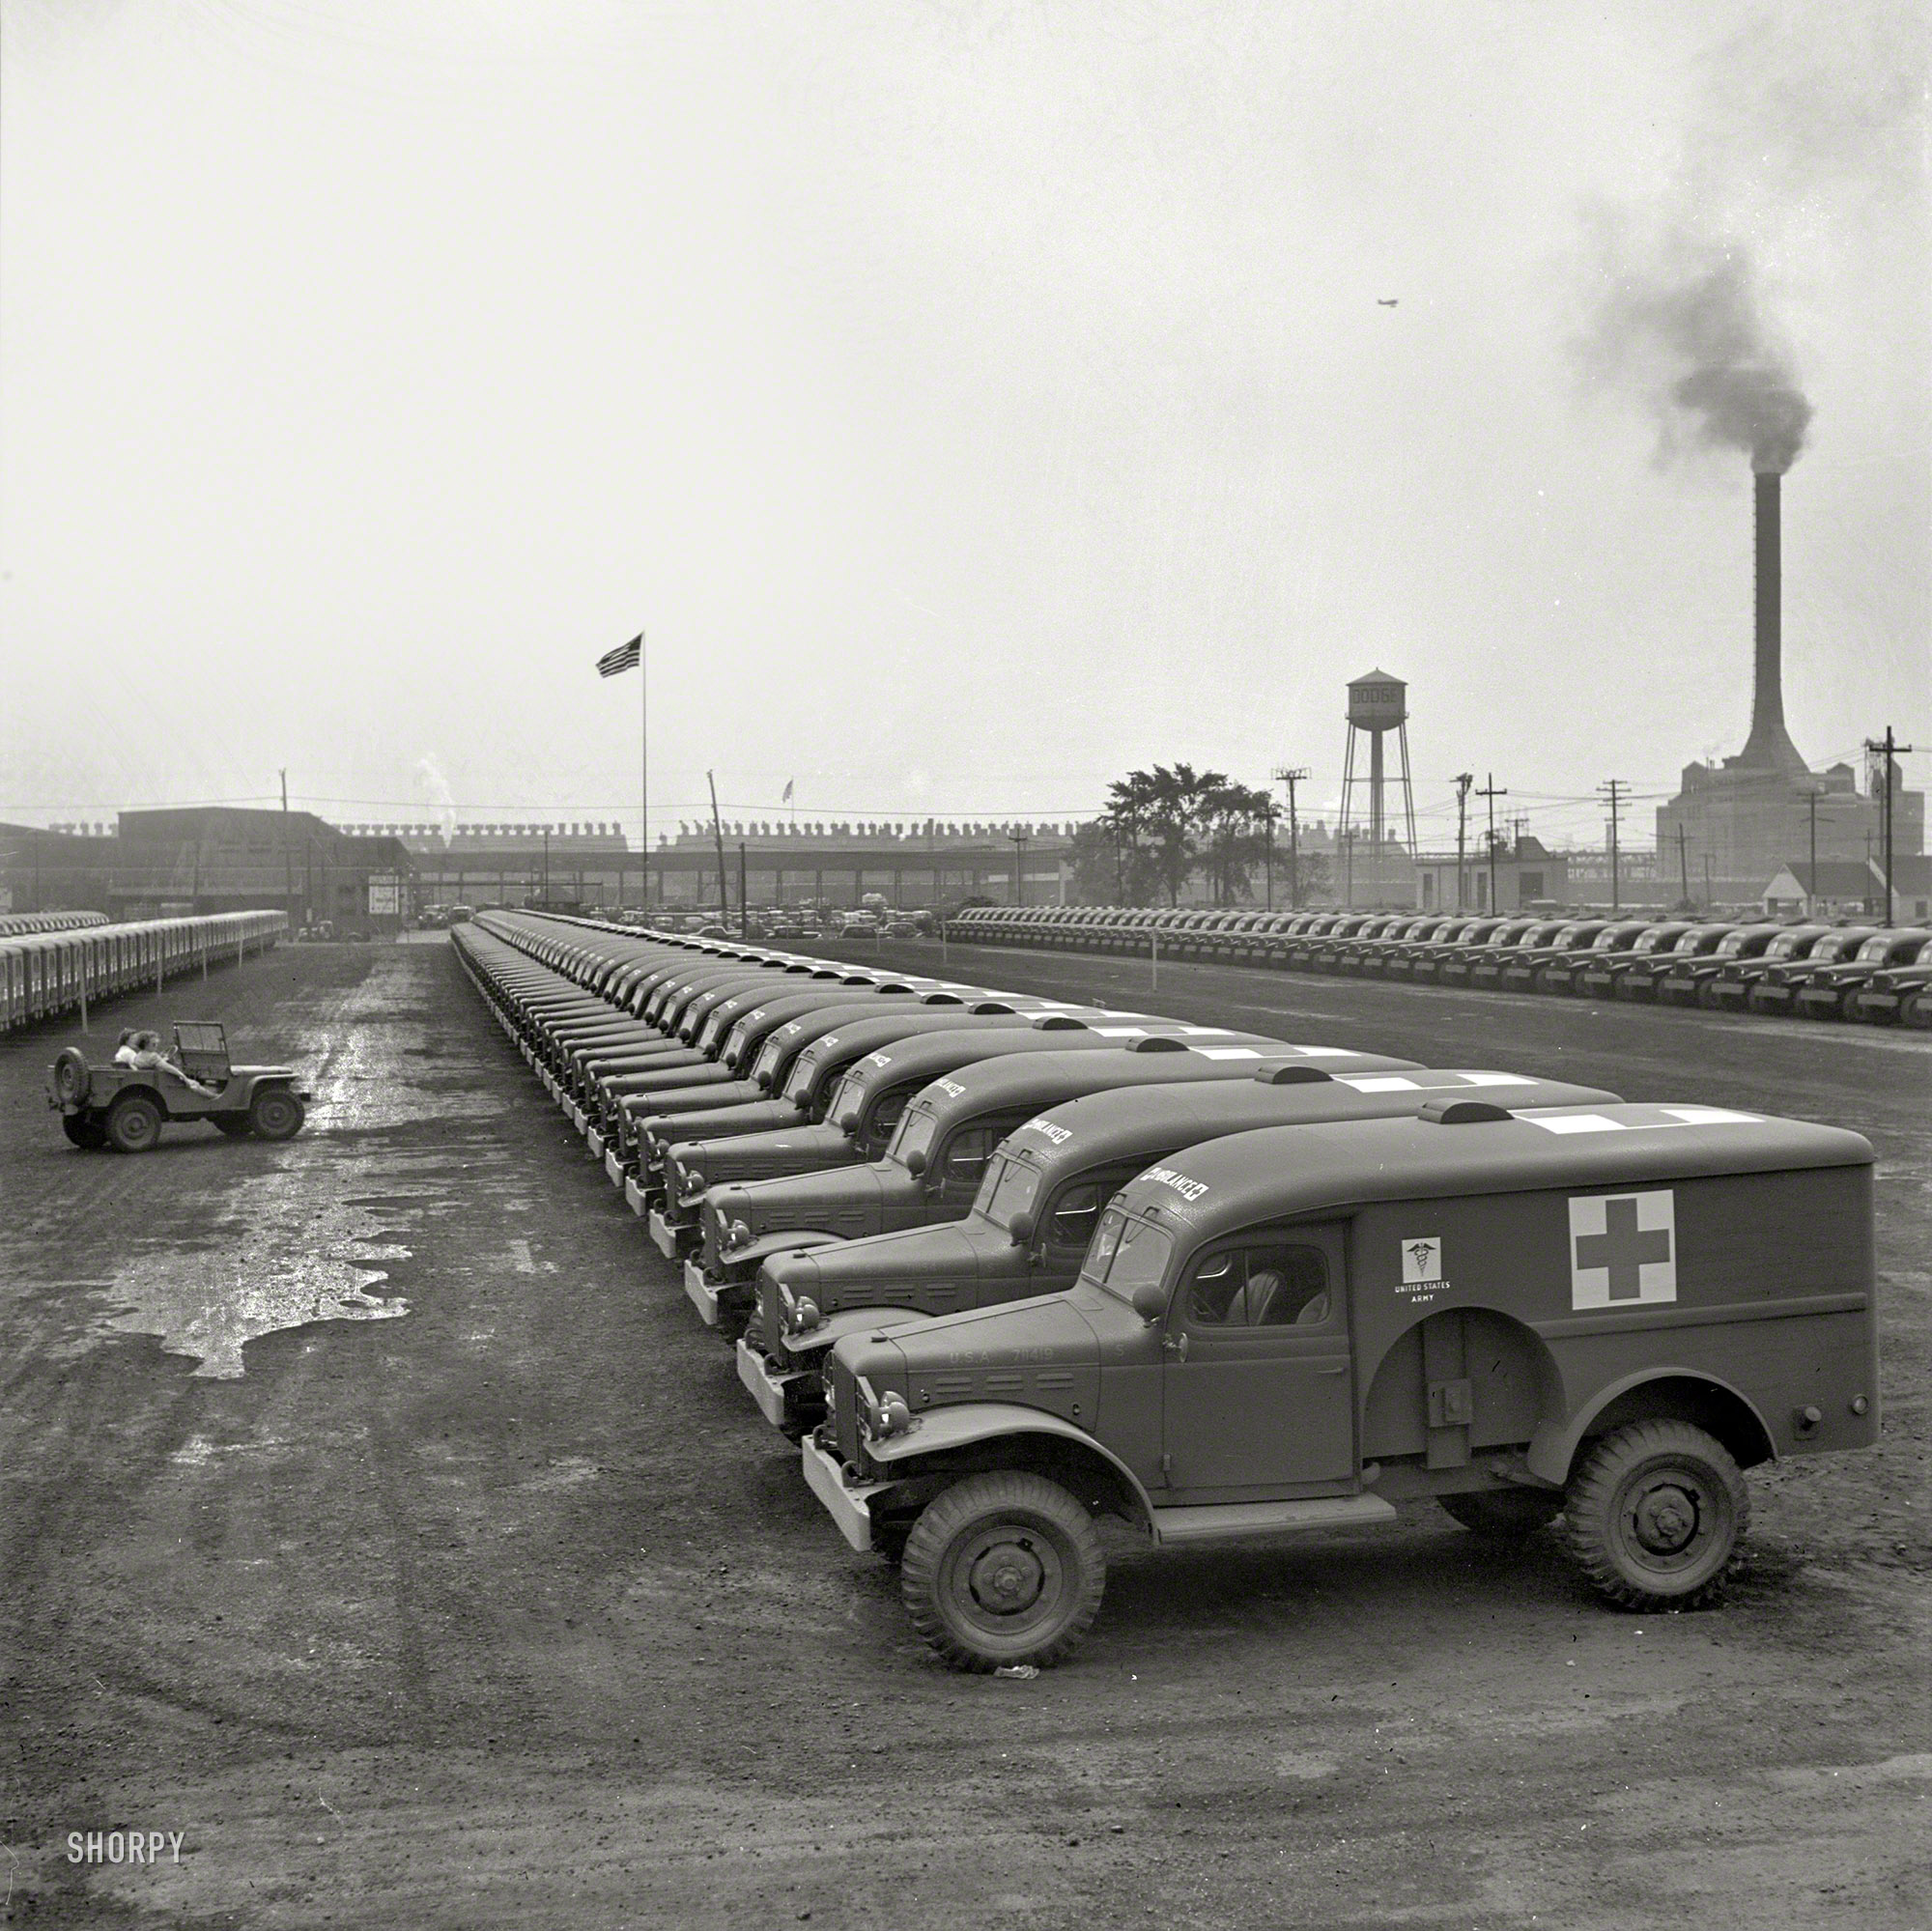 August 1942. "Detroit, Michigan. Chrysler Corporation Dodge truck plant. Dodge ambulances are here, lined up for delivery to the Army." Photo by Arthur Siegel for the Office of War Information. View full size.